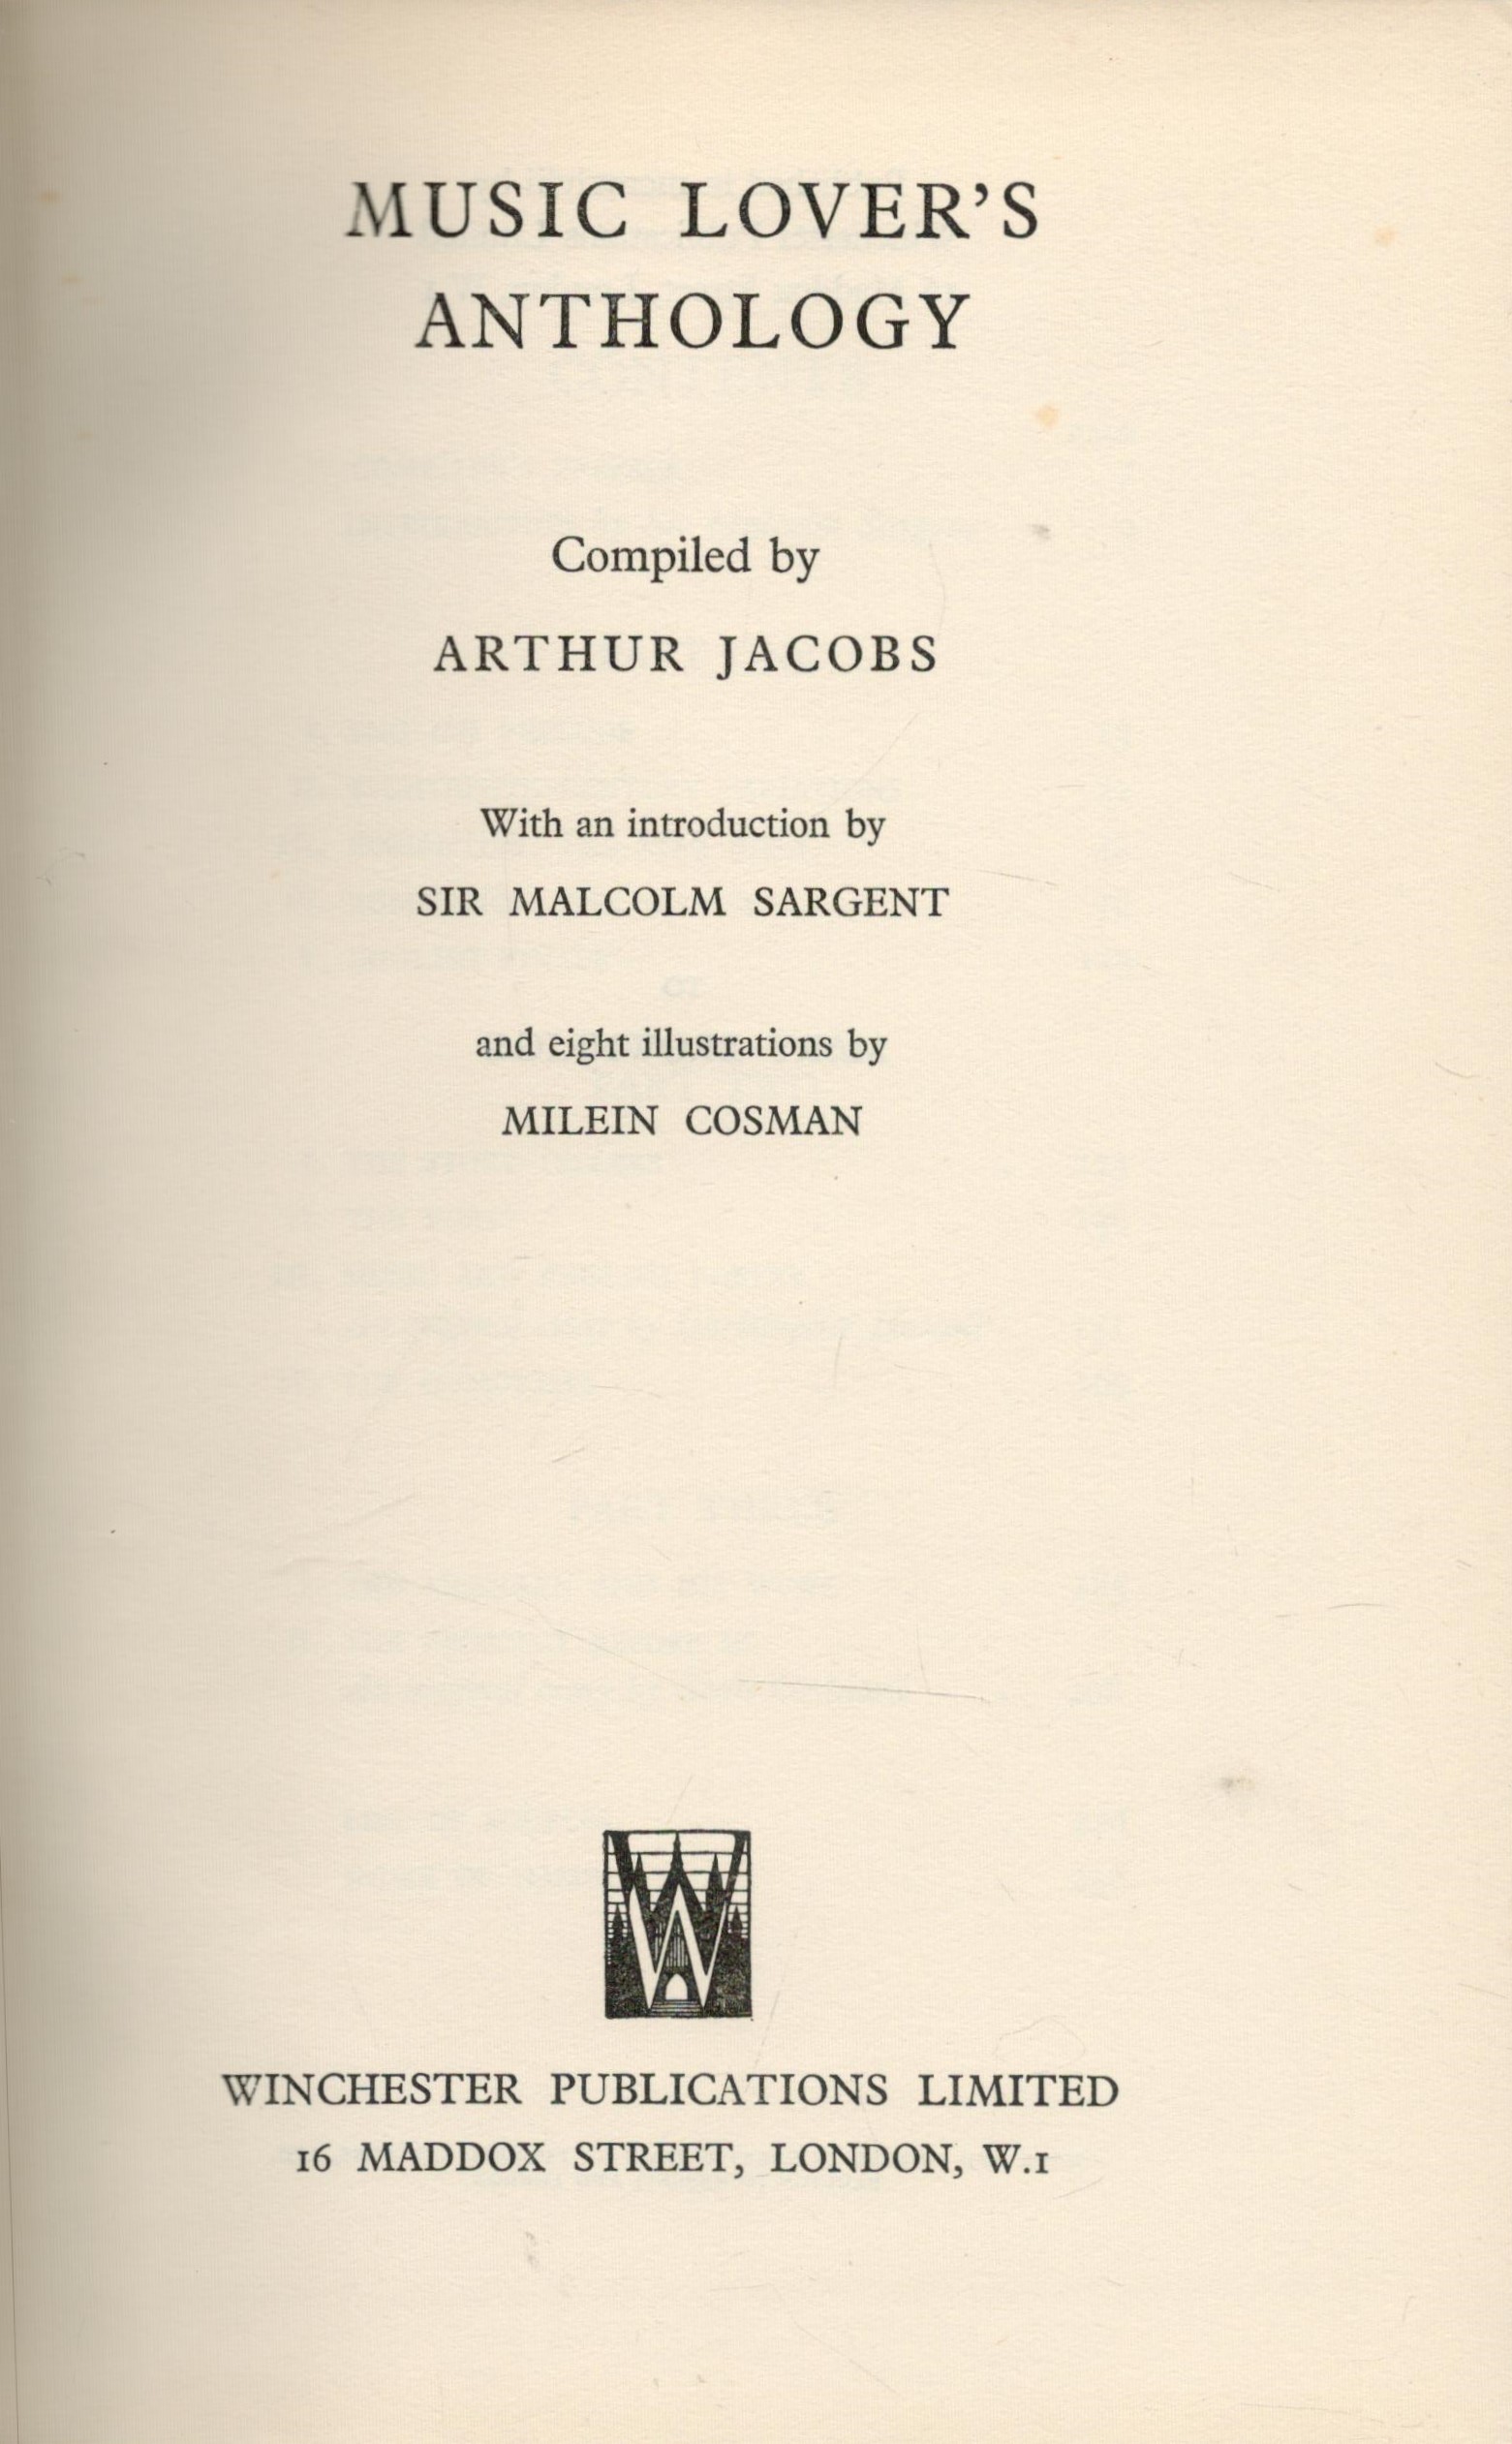 Music Lover's Anthology by Arthur Jacobs 1948 First Edition Hardback Book with 240 pages published - Image 2 of 3